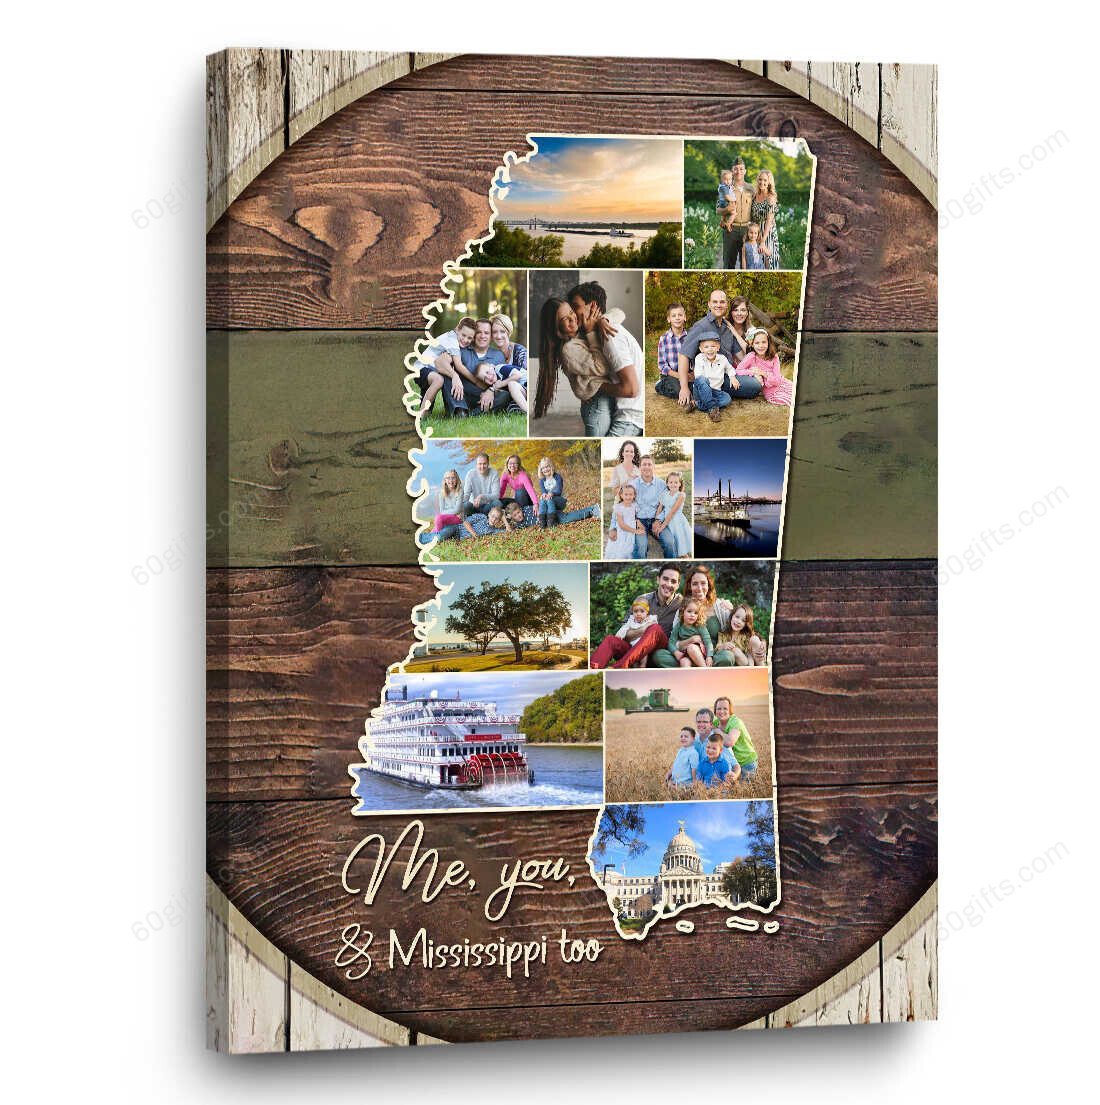 Customized Collage Photo, Mississippi State Map Collage Canvas Birthday Gift, Family Gift Ideas - Personalized Canvas Print Wall Art Home Decor